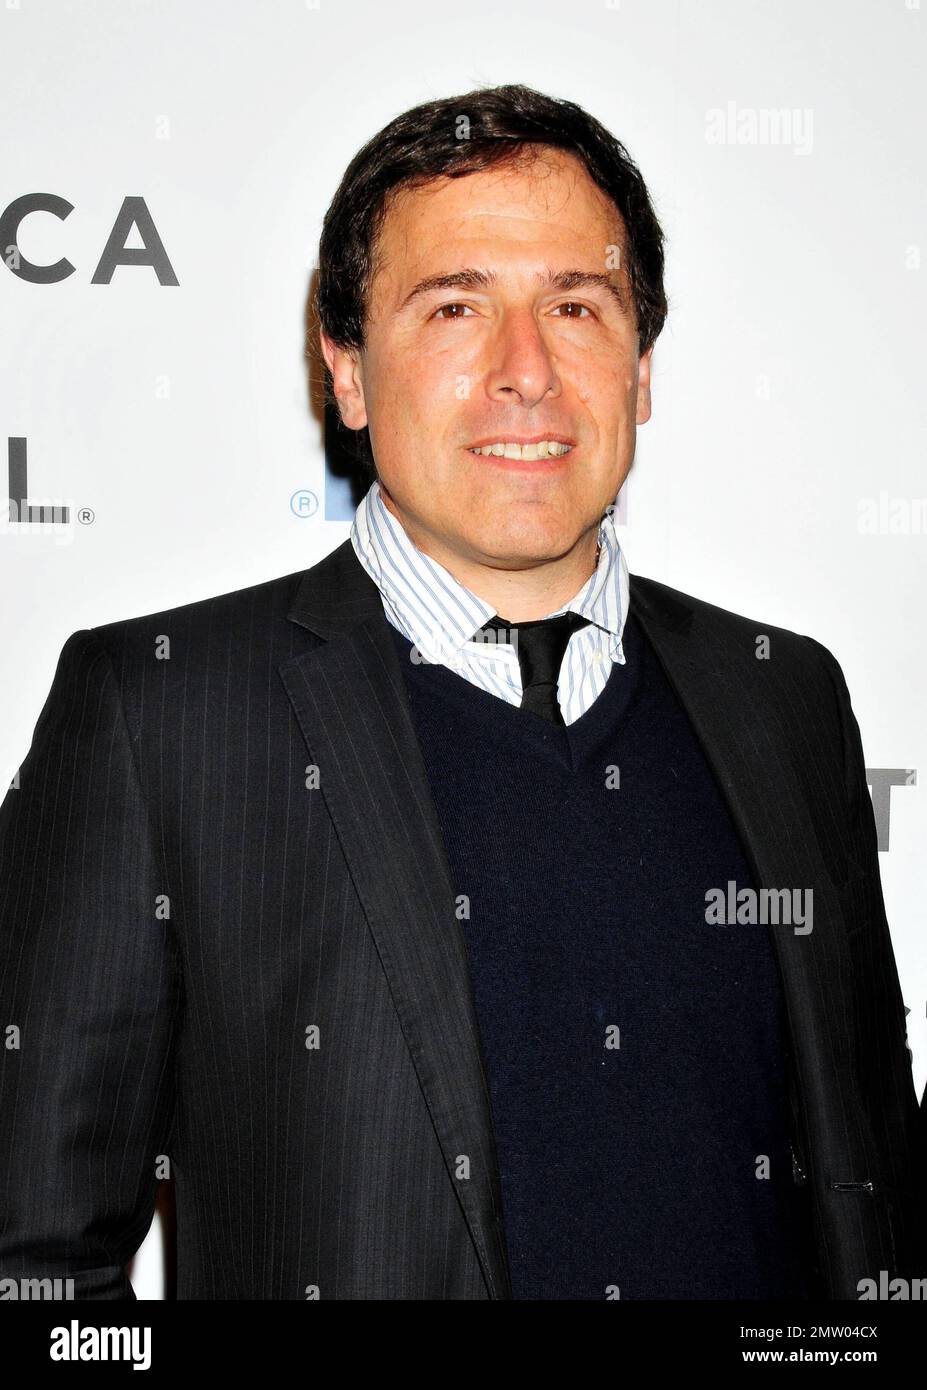 David O. Russell at the opening night of the Tribeca Film Festival, the world premiere of Cameron Crowe's 'The Union' featuring musical legends Elton John and Leon Russell. New York, NY. 4/20/11. Stock Photo